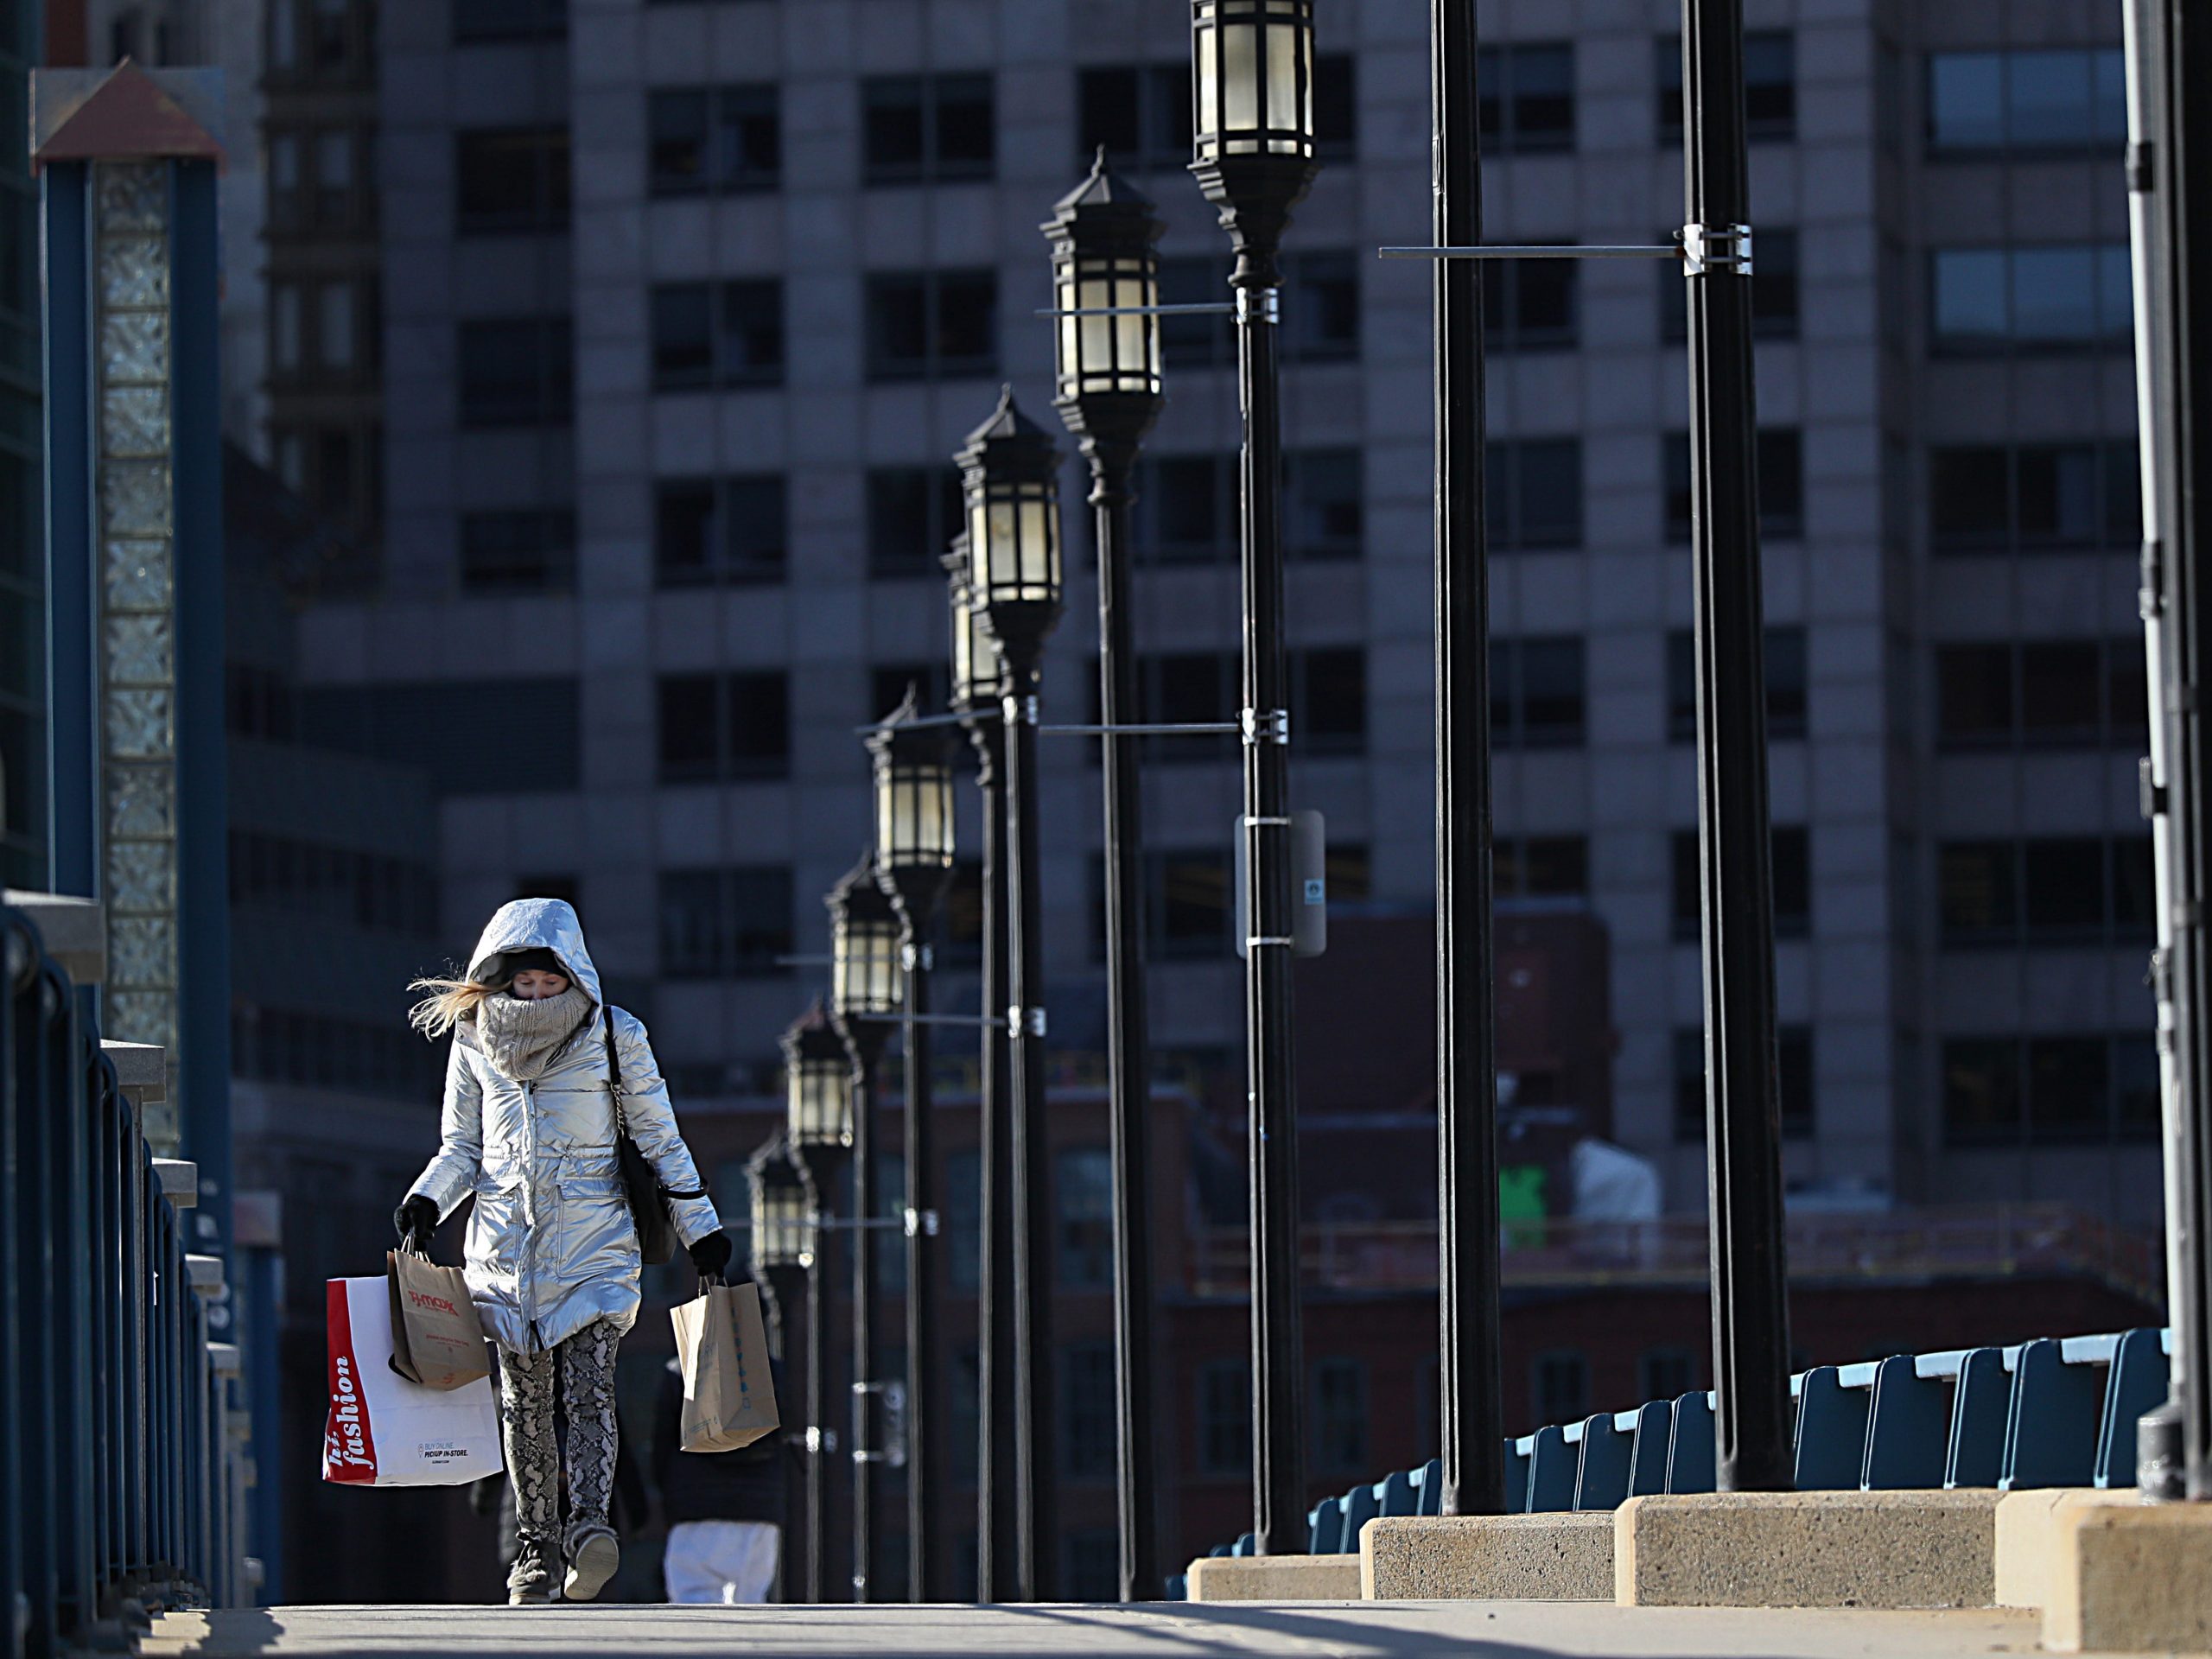 A pedestrian, all bundled up against the cold, walks across the Seaport Blvd Bridge in Boston on March 15, 2021.